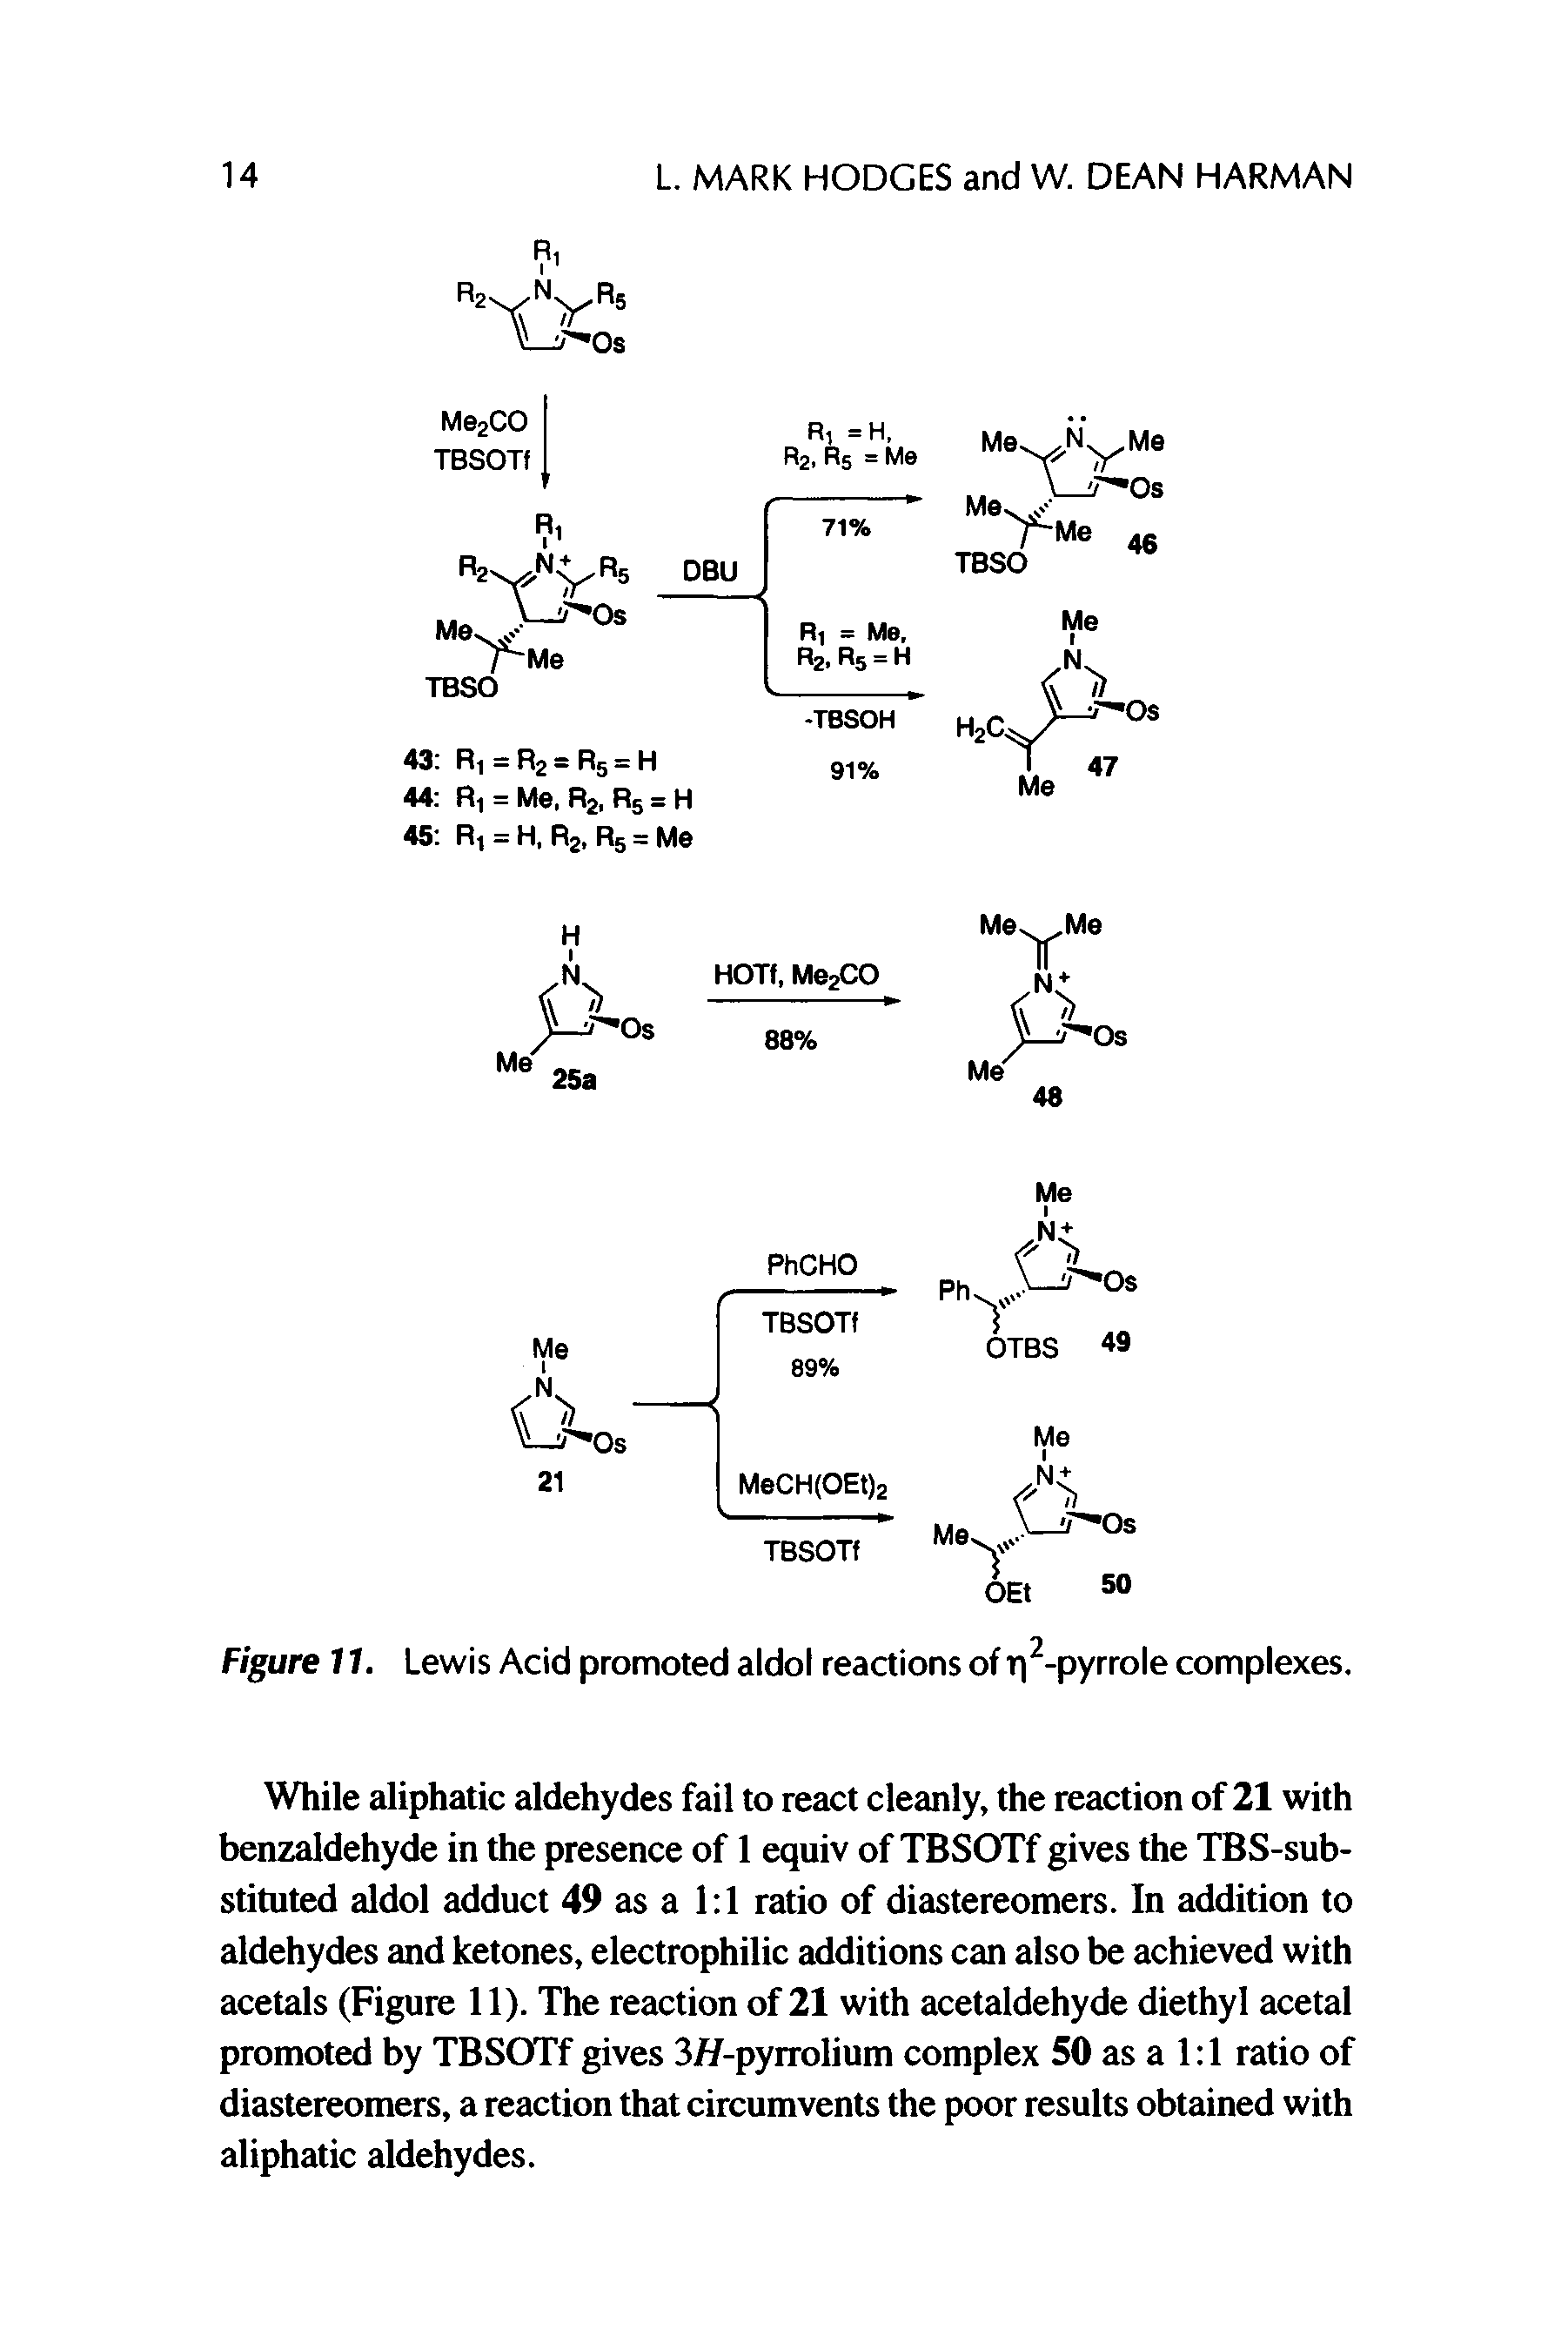 Figure 11. Lewis Acid promoted aldol reactions of rf-pyrrole complexes.